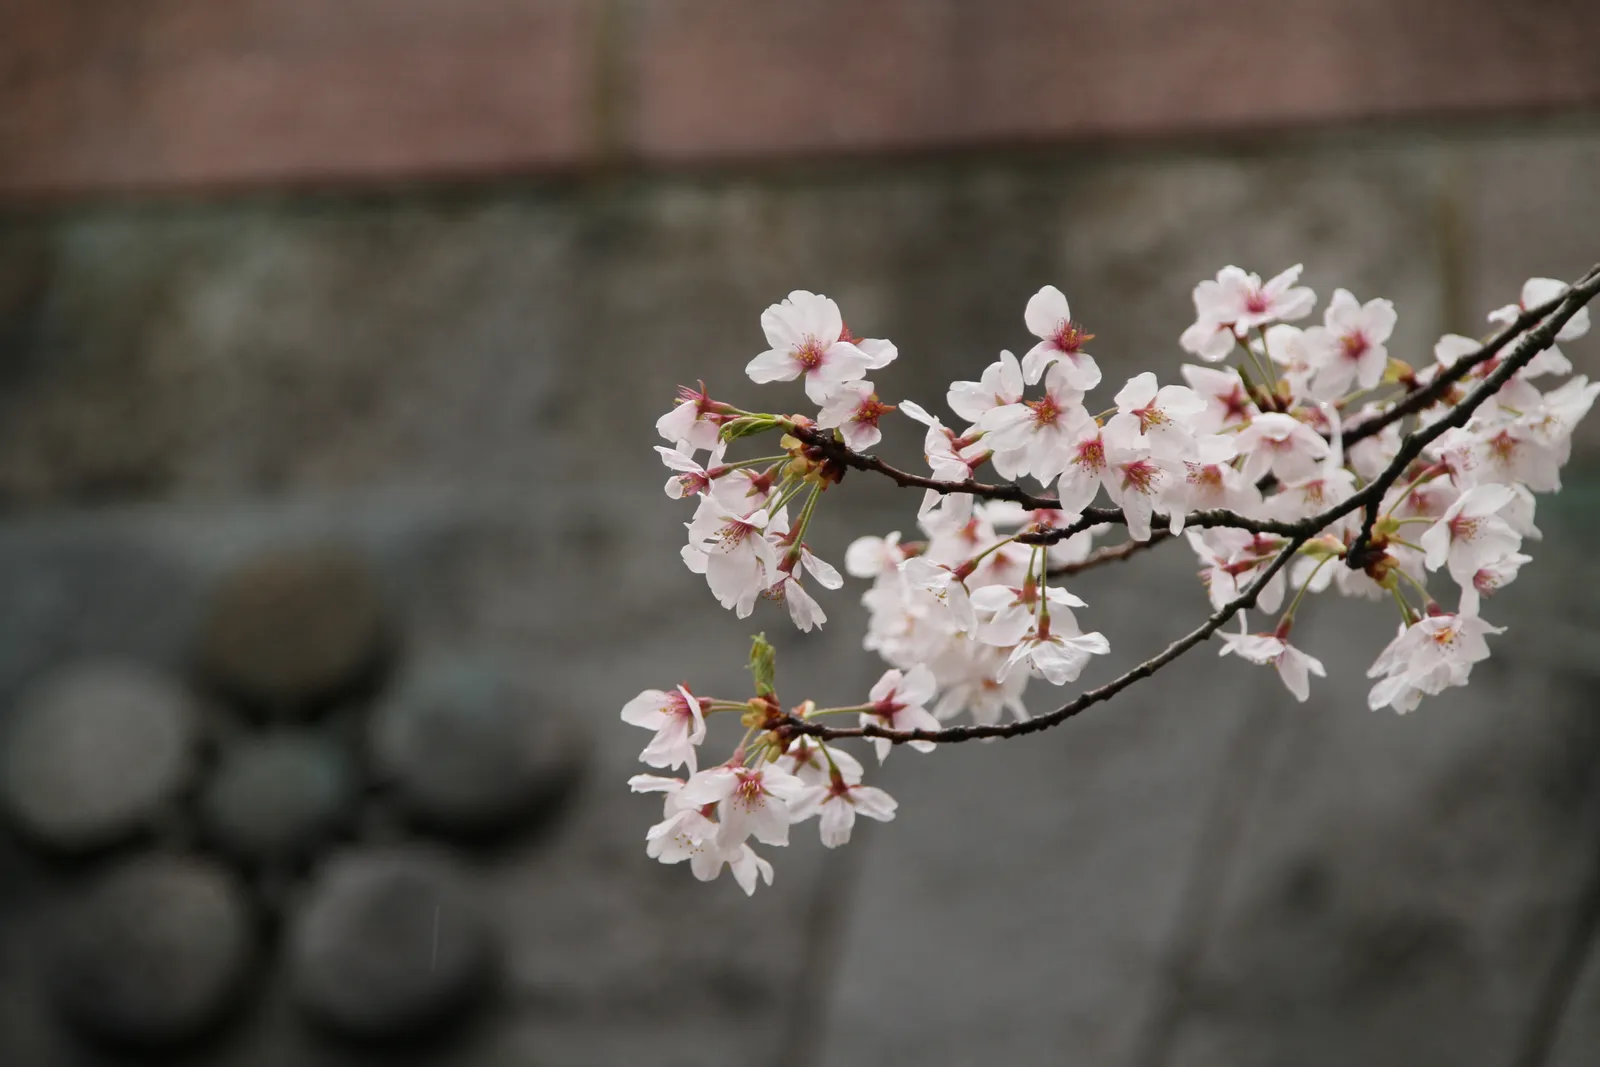 Why Are Japan's Cherry Blossom Trees Blooming in Fall?, Smart News